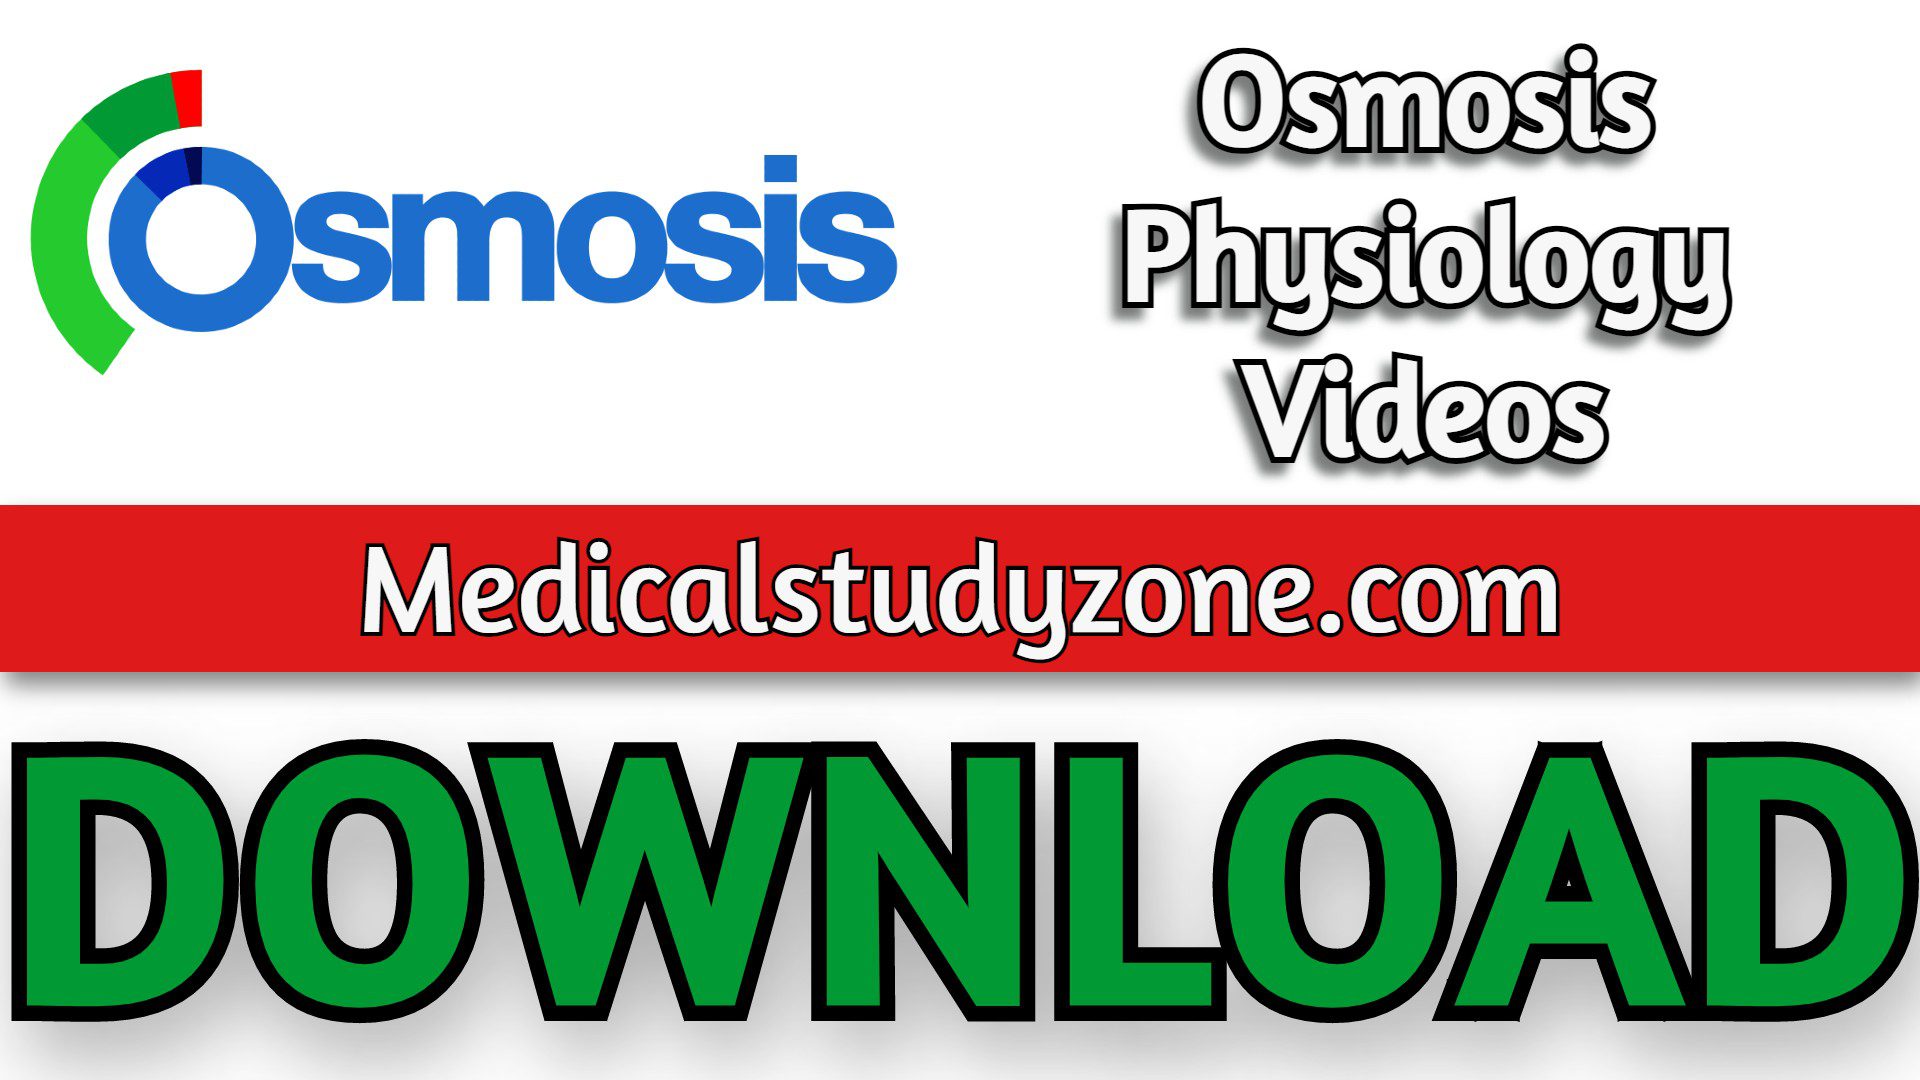 Osmosis Physiology Videos 2023 Free Download